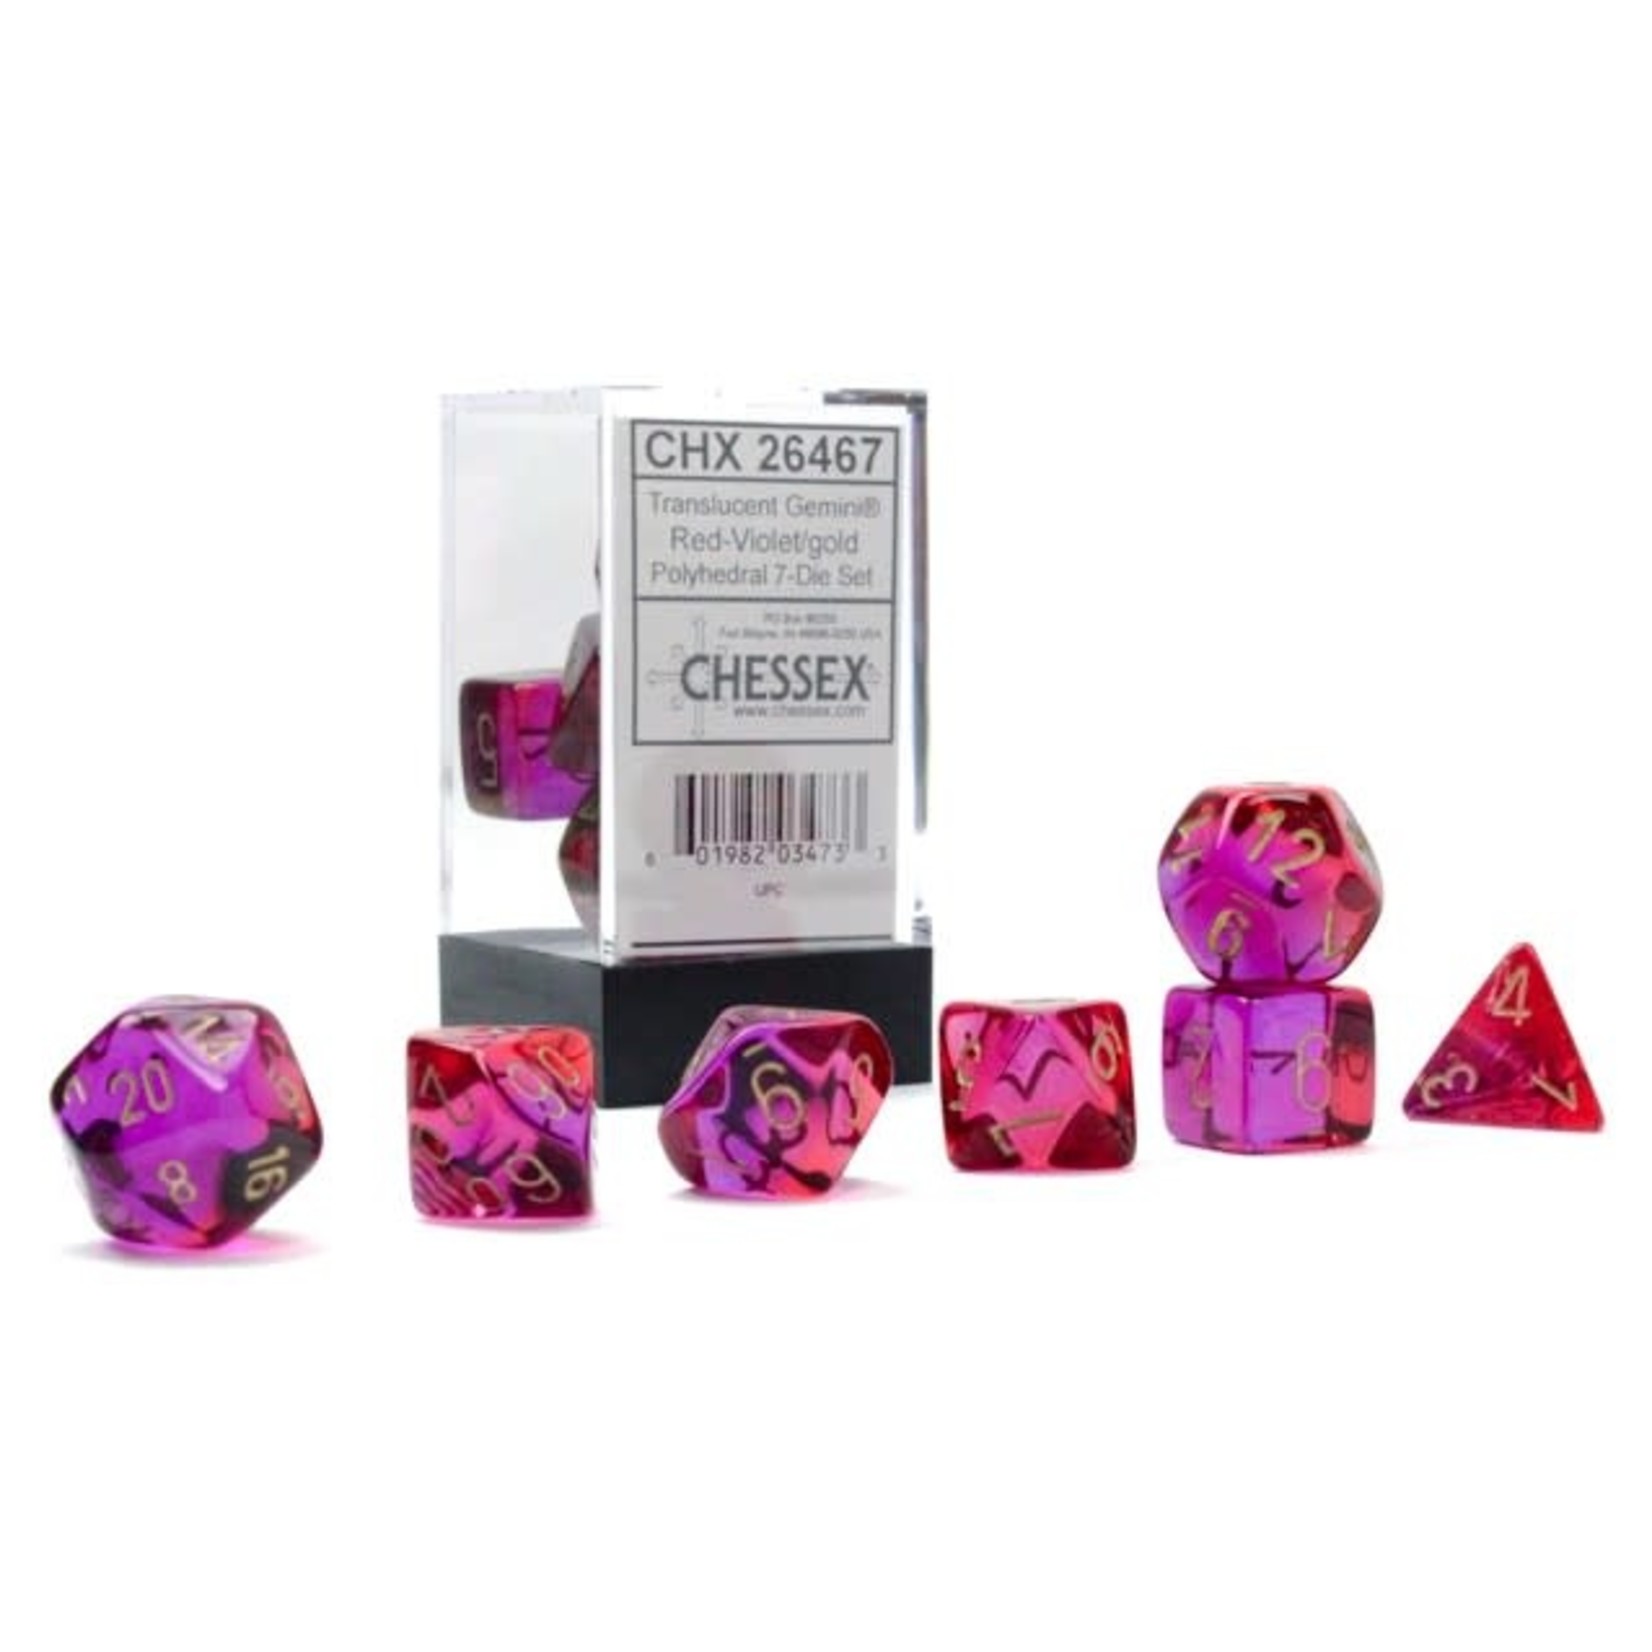 Chessex Chessex Gemini Translucent Red / Violet with Gold Polyhedral 7 die set